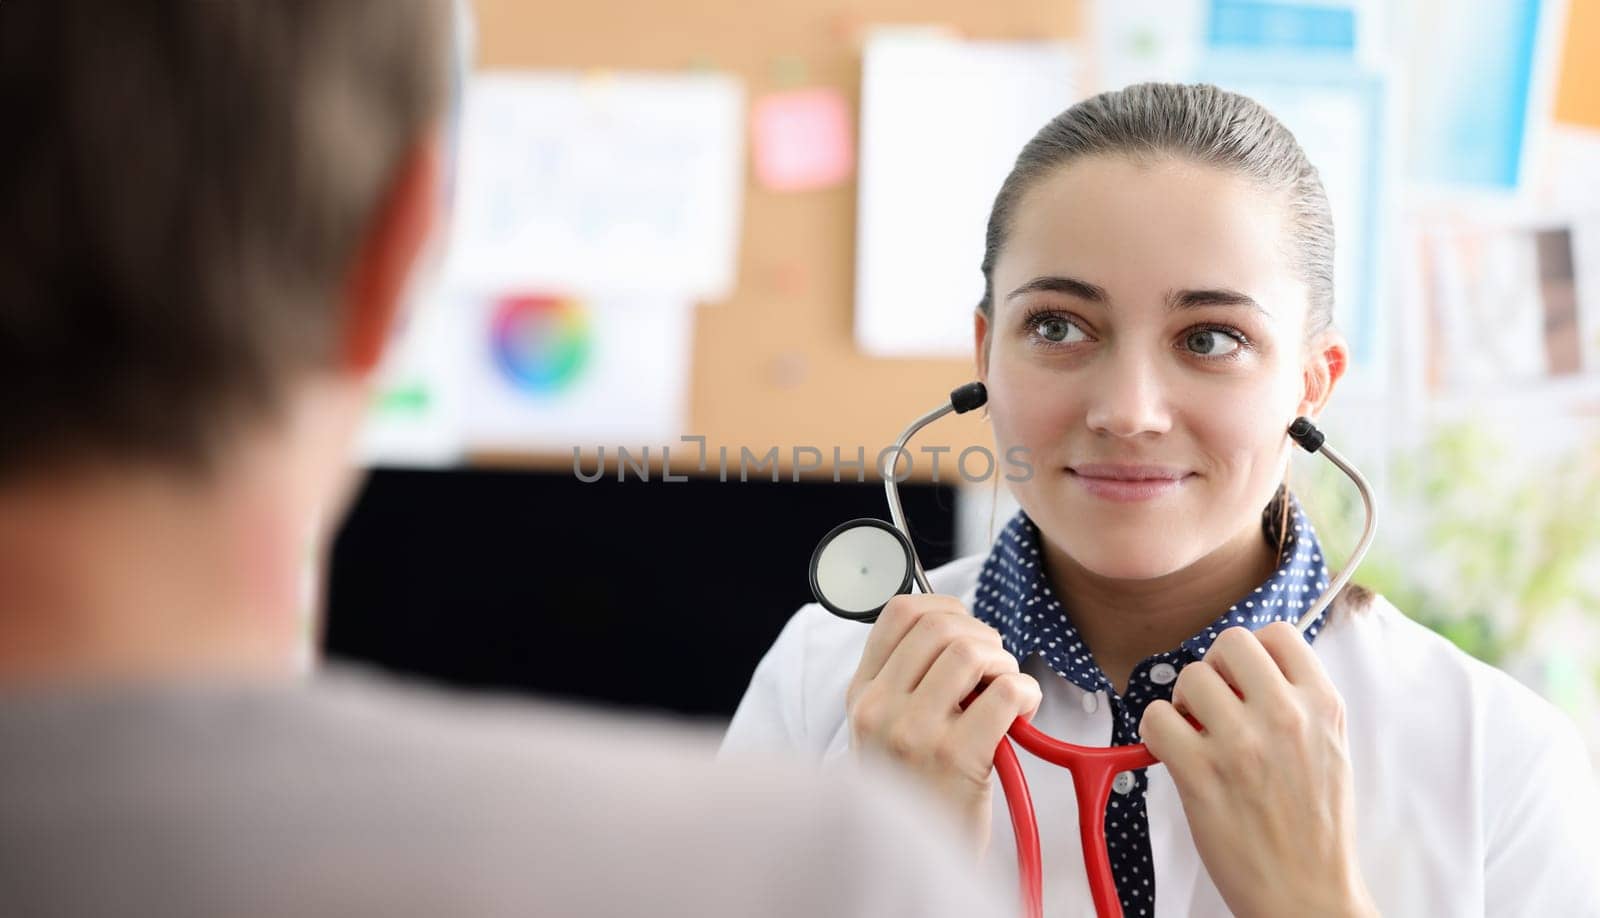 Therapist removes headphones from stethoscope by kuprevich